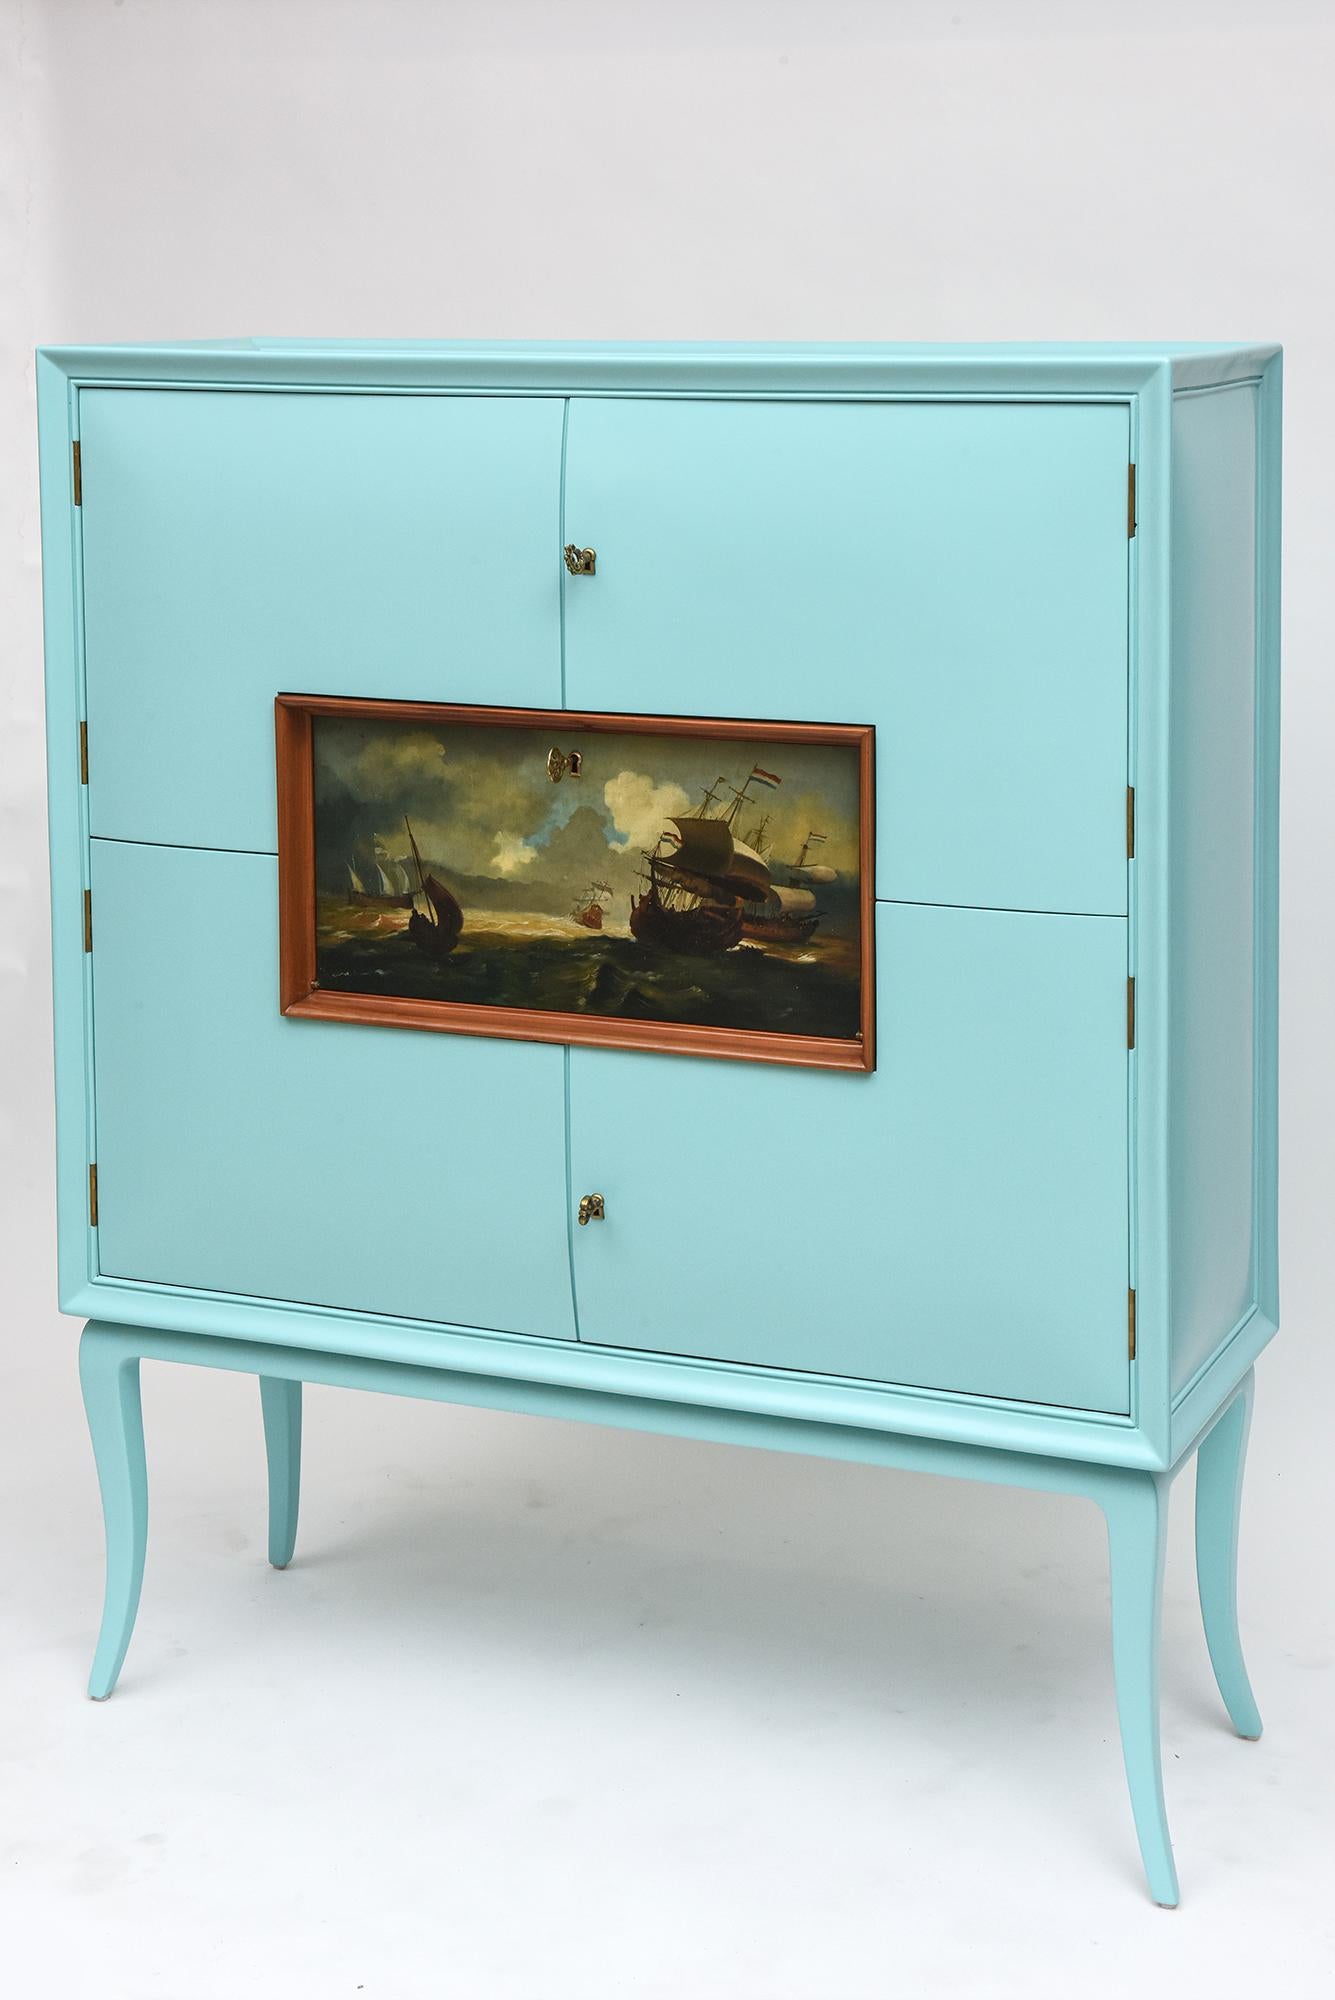 Dramatic 1950s Italian bar cabinet features an elegant curved body on tall, slender cabriole legs, gessoed and painted in Tiffany box blue and lined in rich European walnut. Center framed fold-down shelf features a classical maritime oil painting